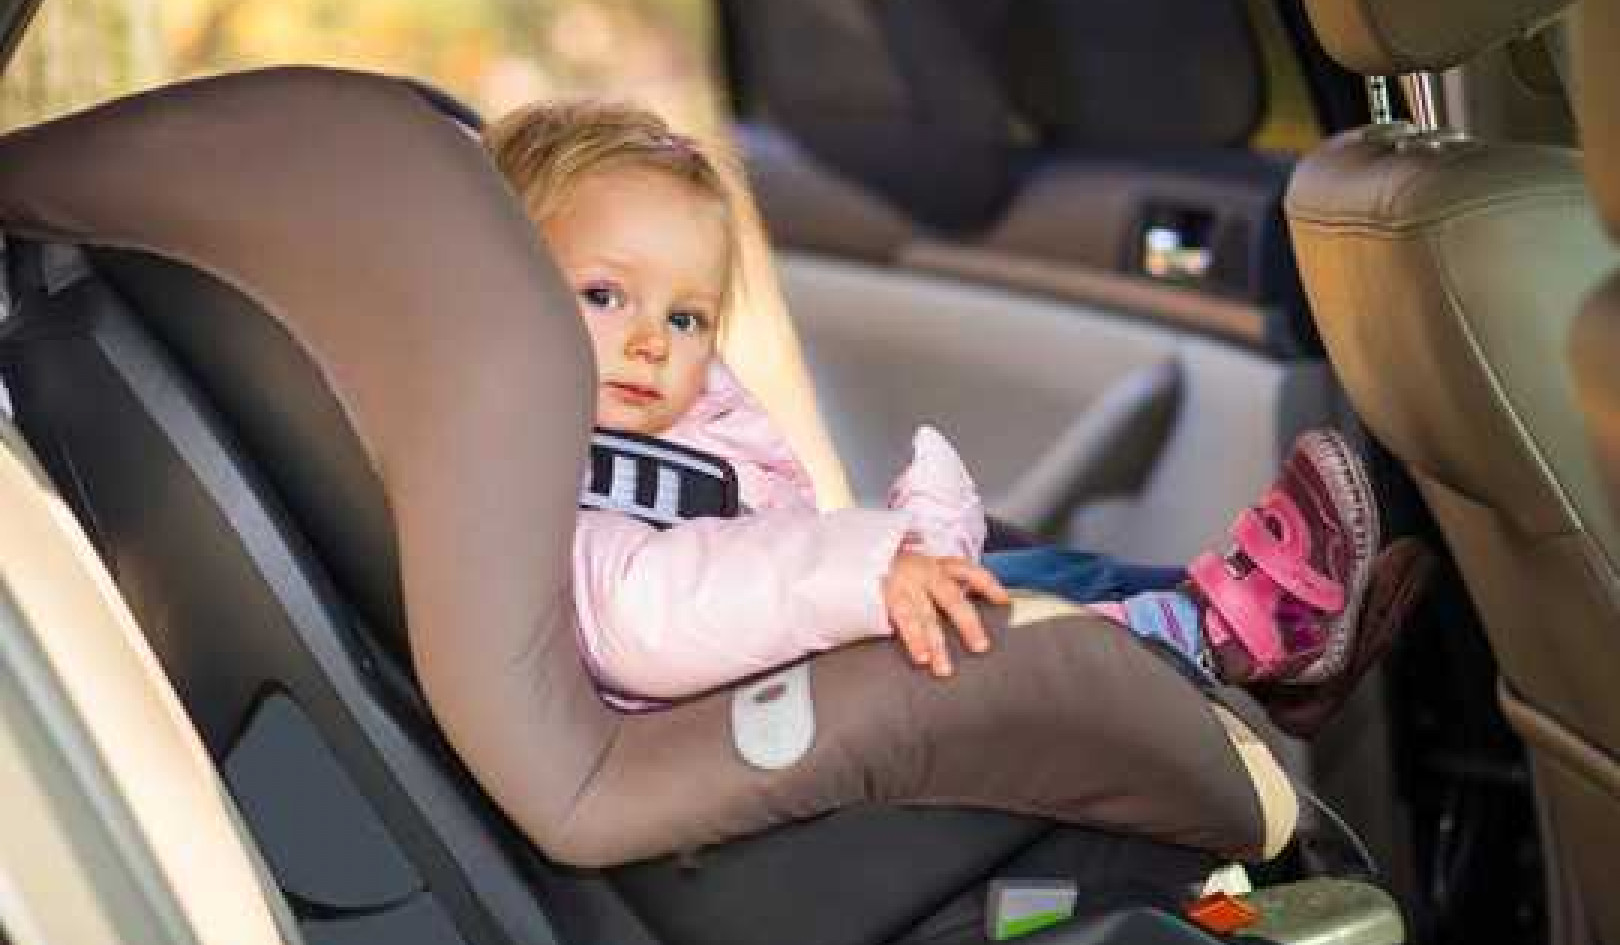 Children Dying In Hot Cars Is A Tragedy That Can Be Prevented